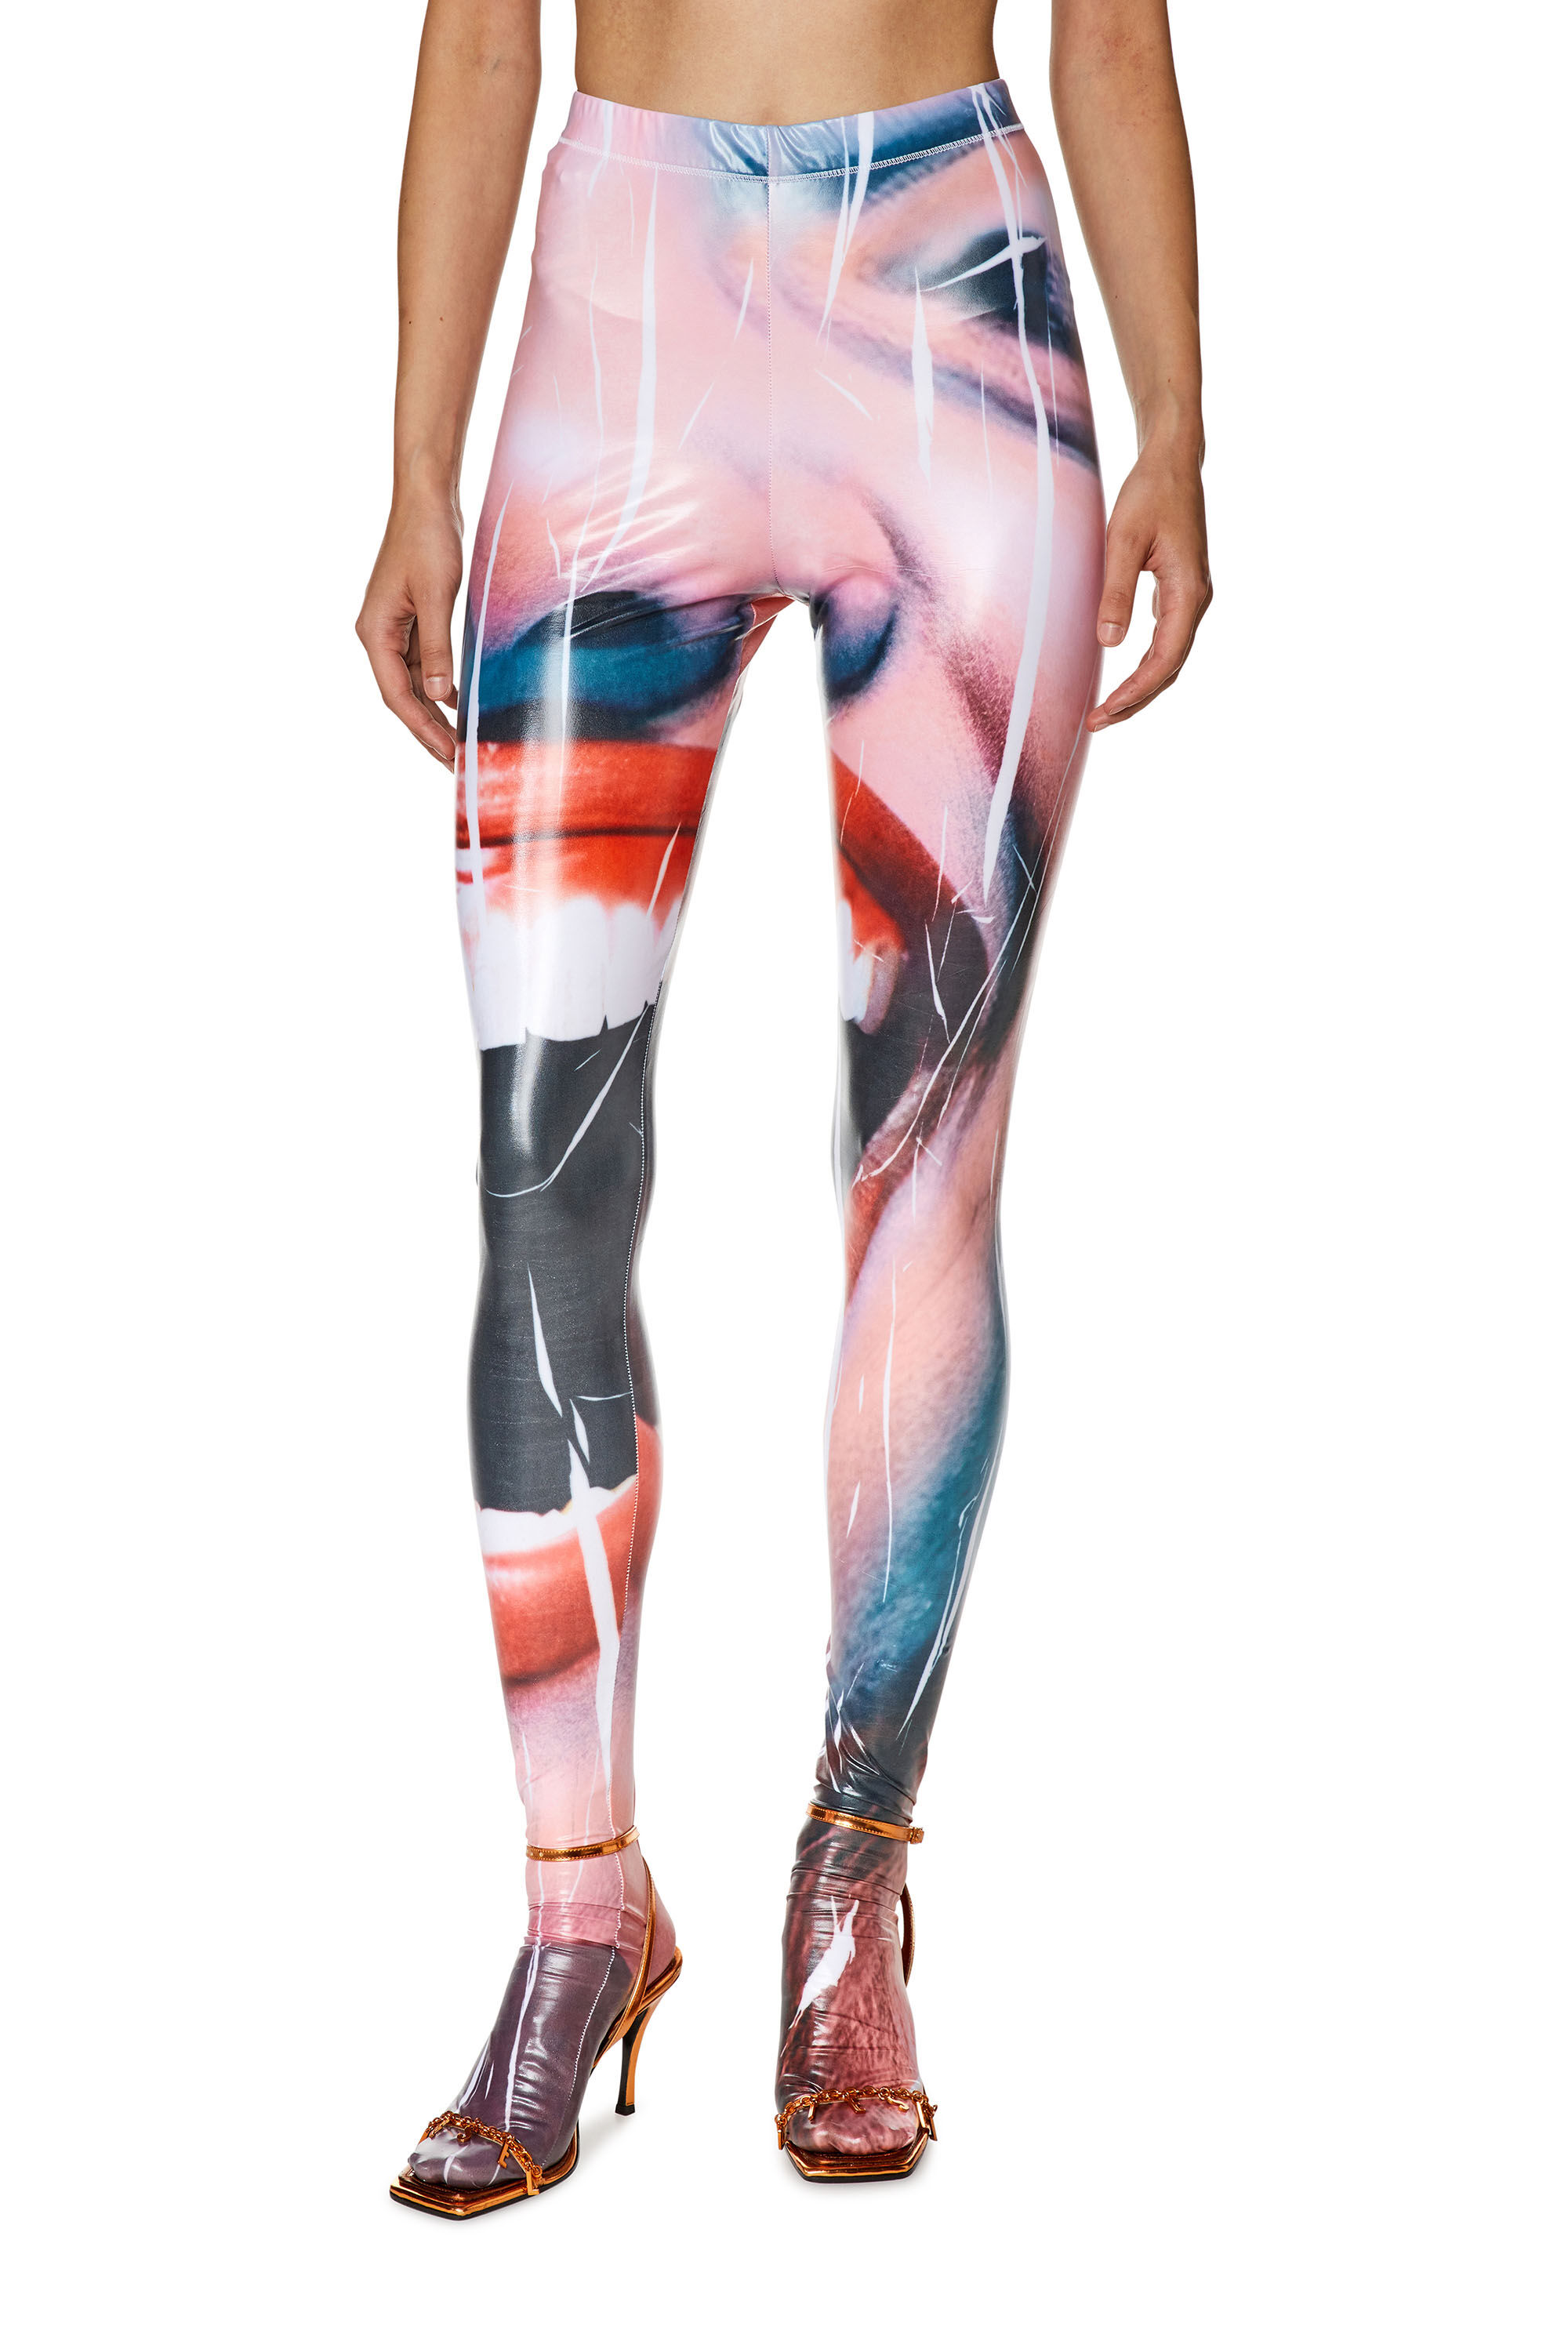 Women's Tights with close-up face print